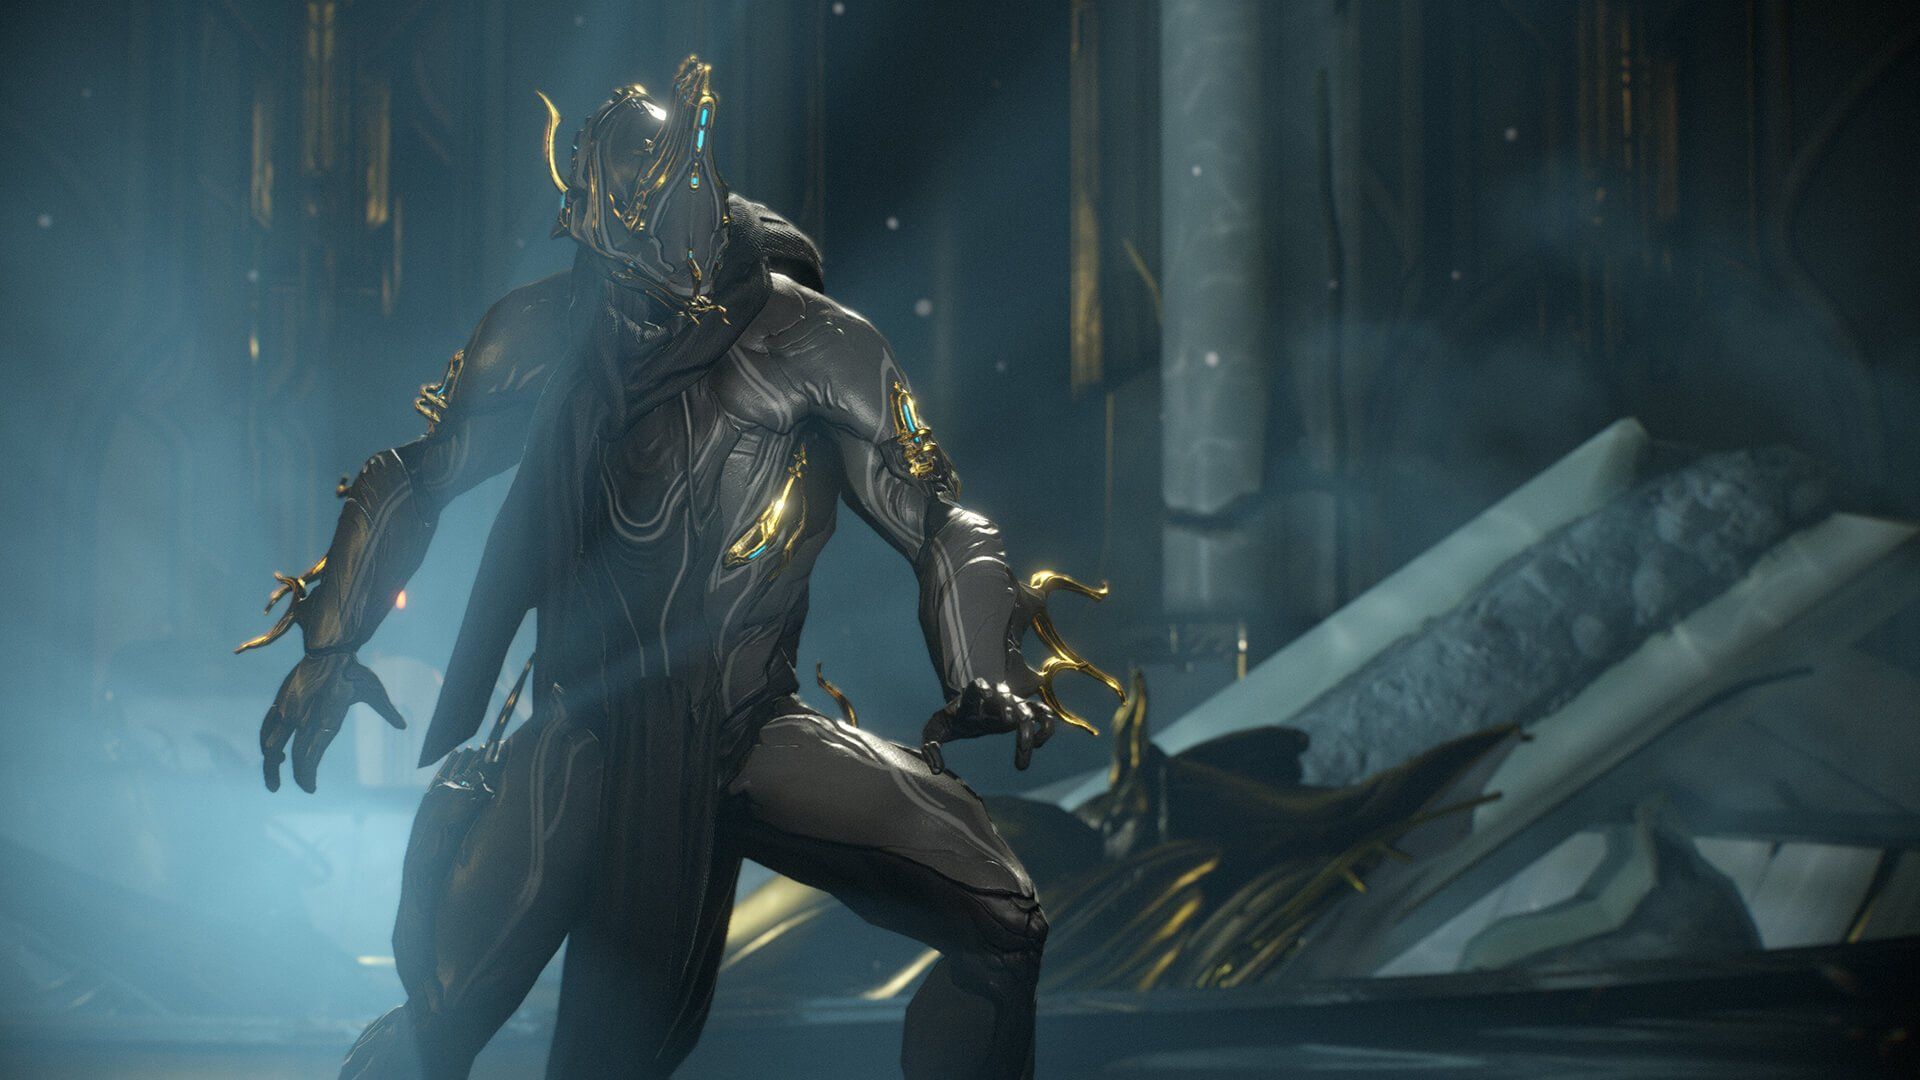 Excalibur Umbra A Twitter: Warframe Excalibur Umbra Sentient Operator Control Sword Over Gun New To Verse And Character Will Possibly Try To Kill You At First, Seeing All As A Threat Due To